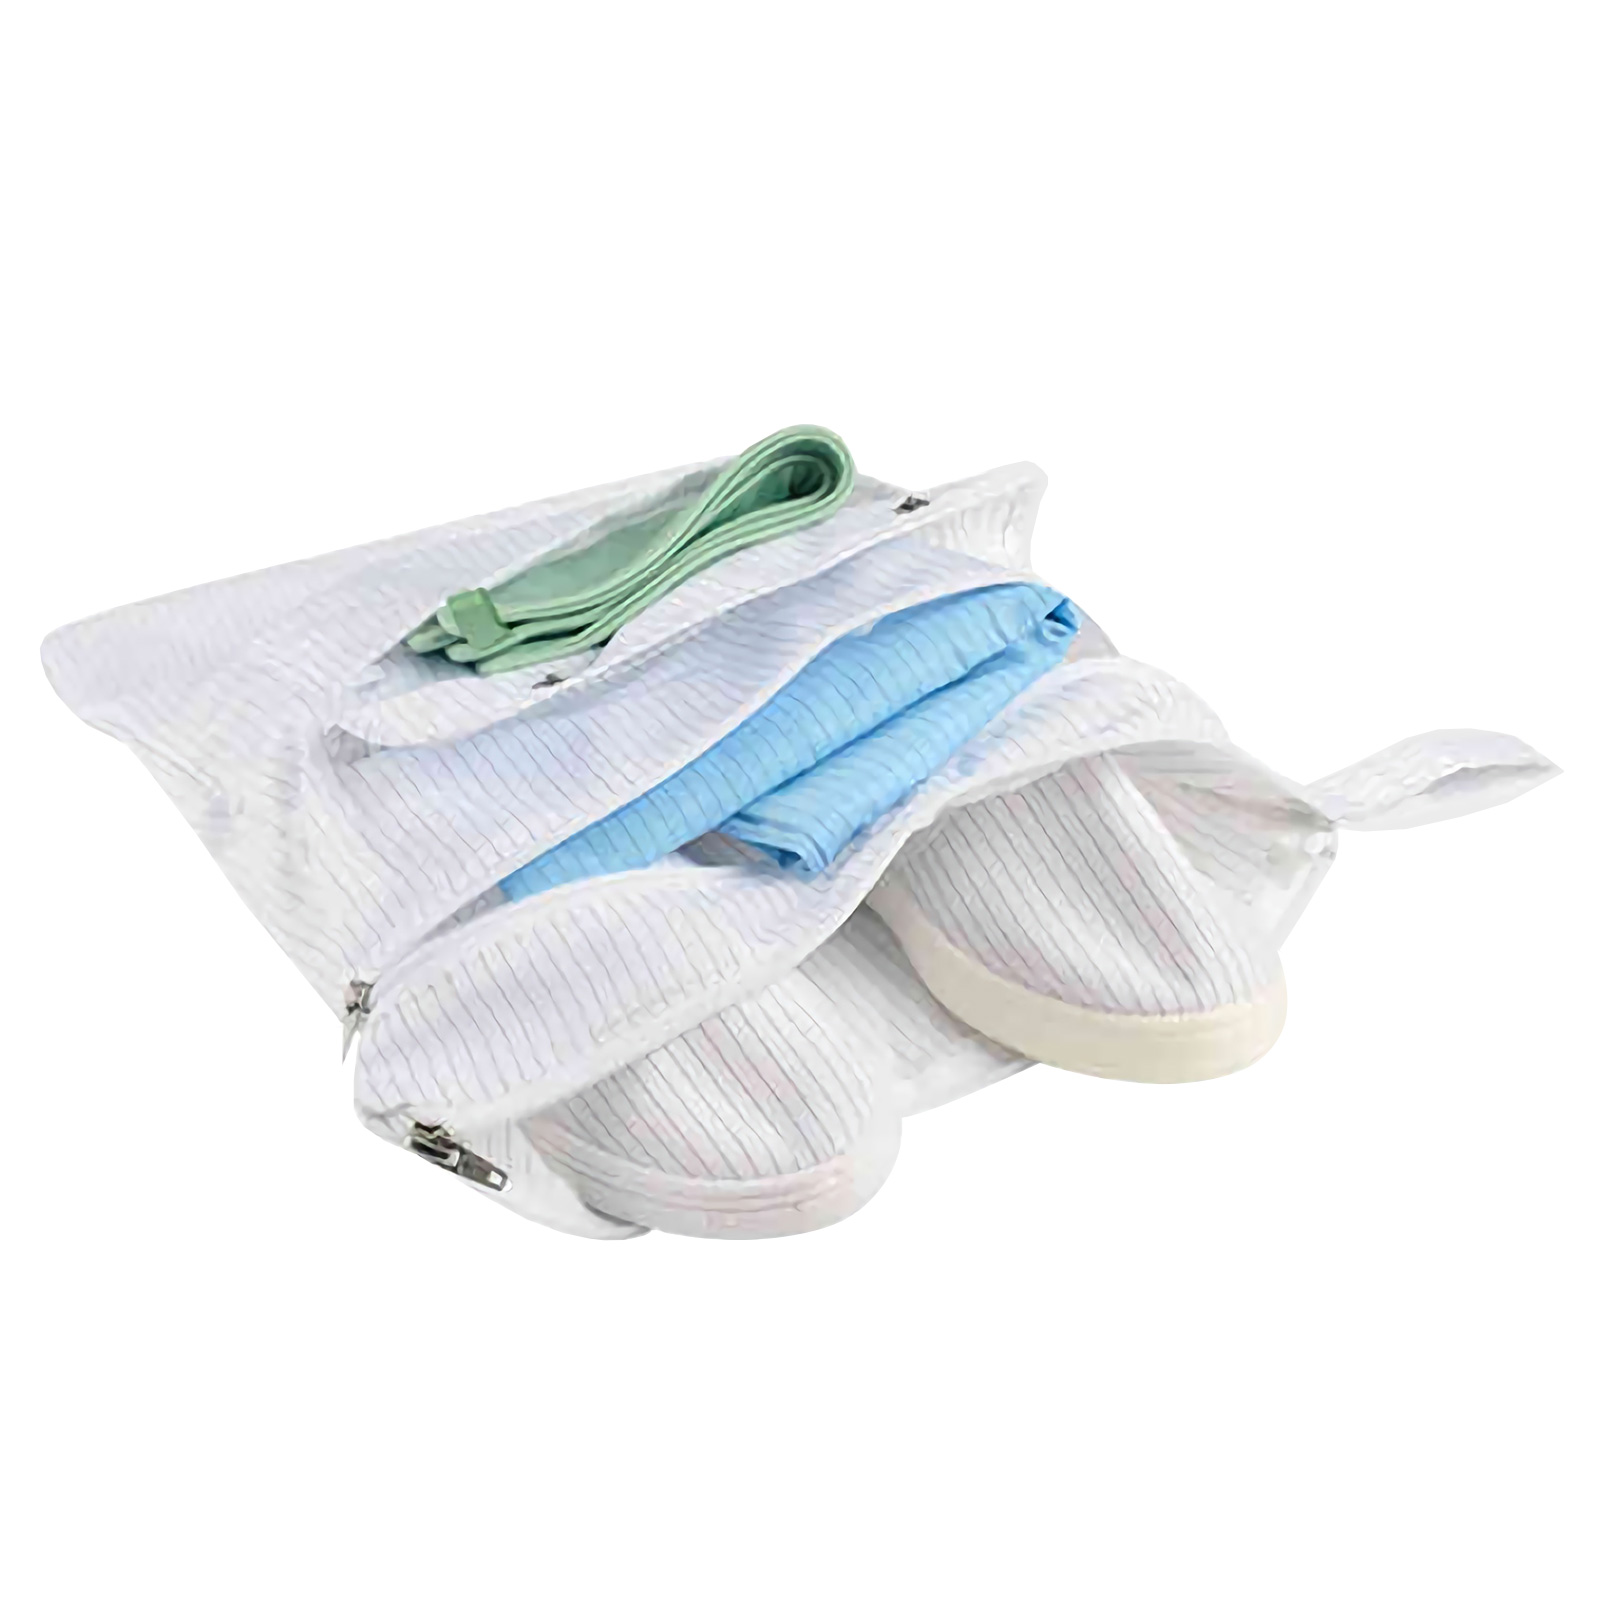 ADAMAS BETA Lab Disposable Shoe Cover Laboratory Isolation Shoes Cover Shoe Dusting/Cleaning Bags Antistatic/Non-woven High Boots Cover